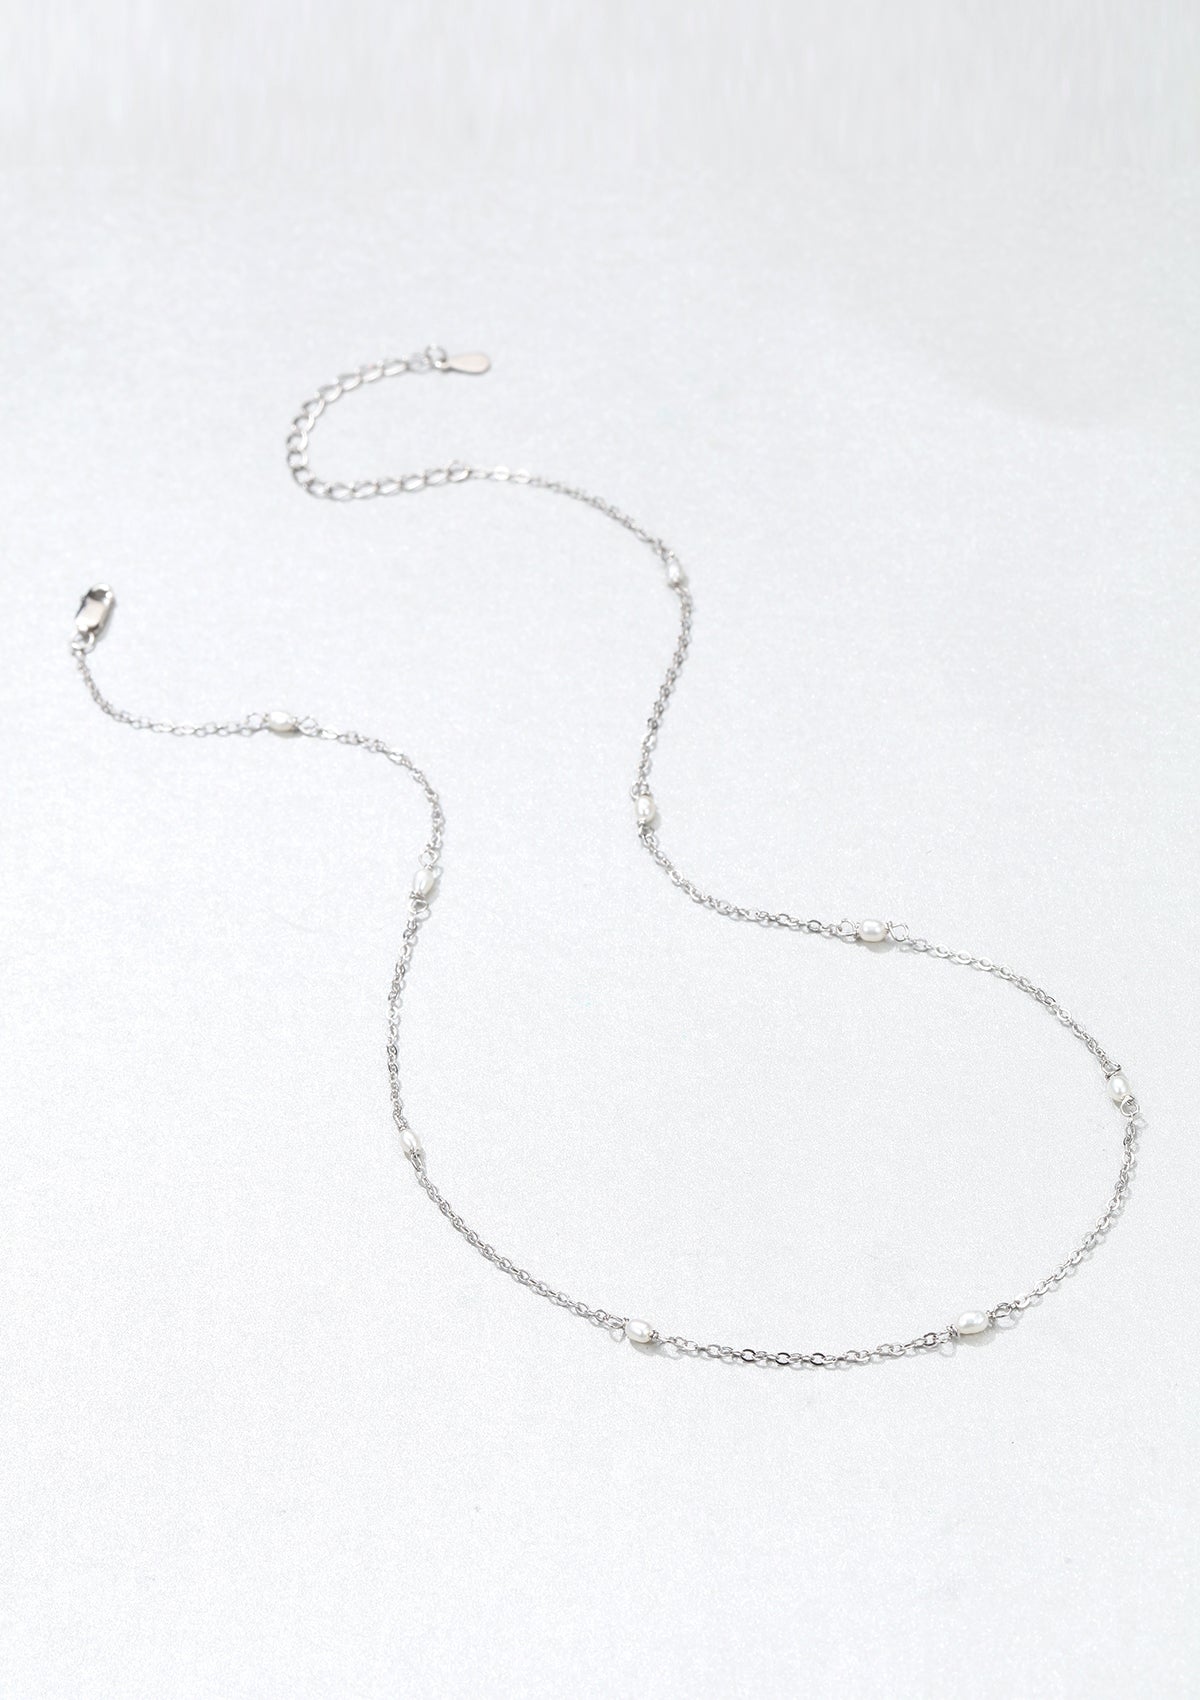 Pearl Chain Necklace Sterling Silver